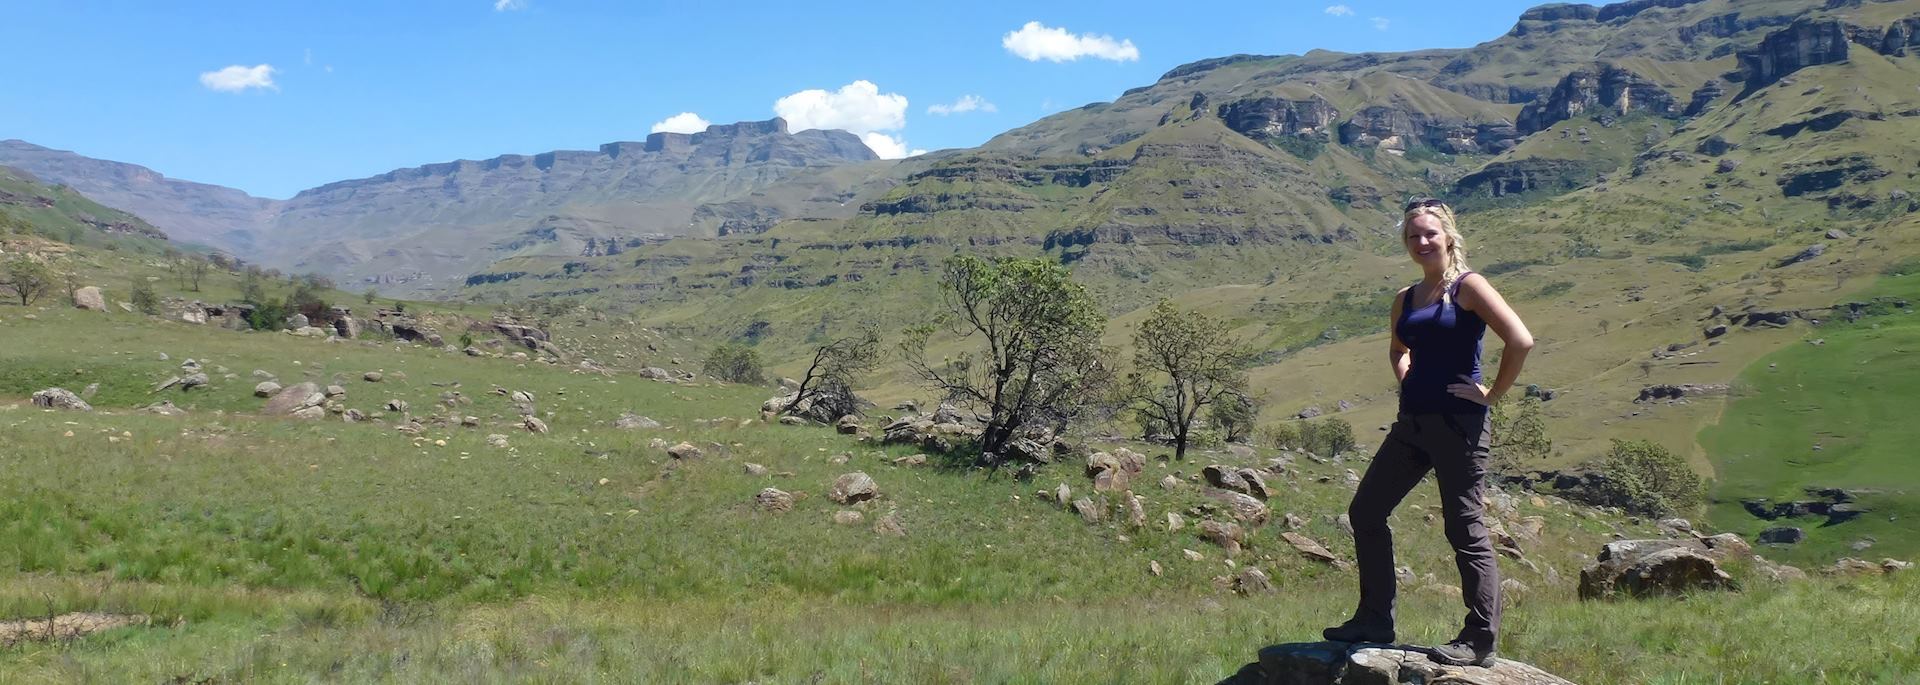 Anna hiking in the Drakensberg Mountains, South Africa